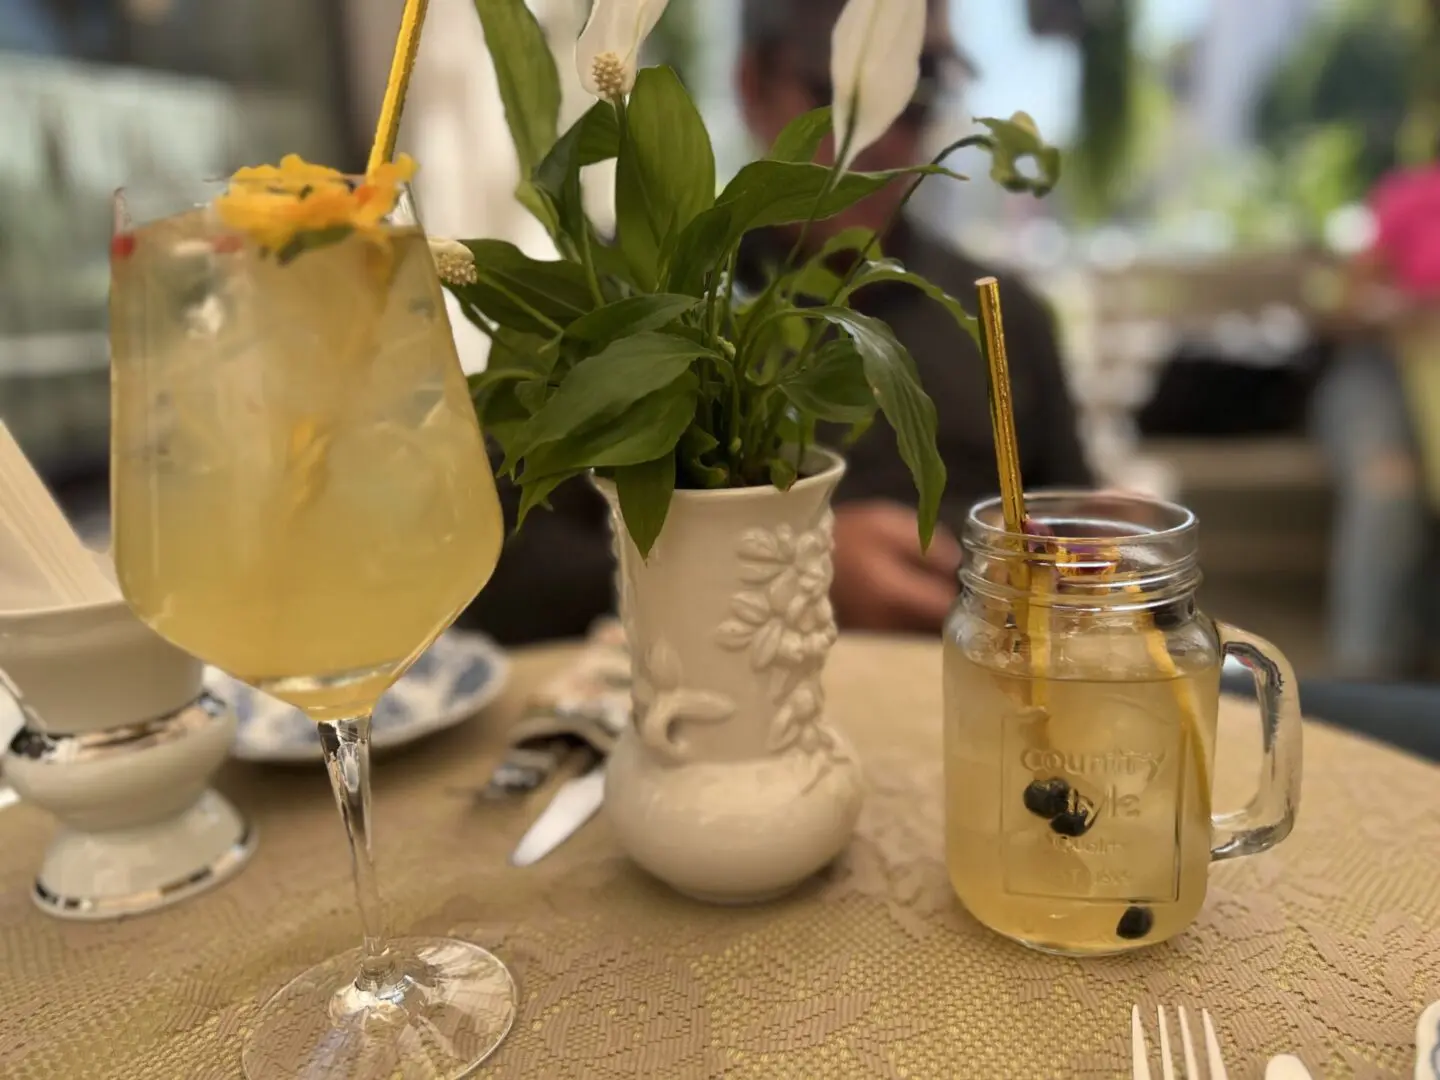 A table with two glasses and a jar of lemonade.